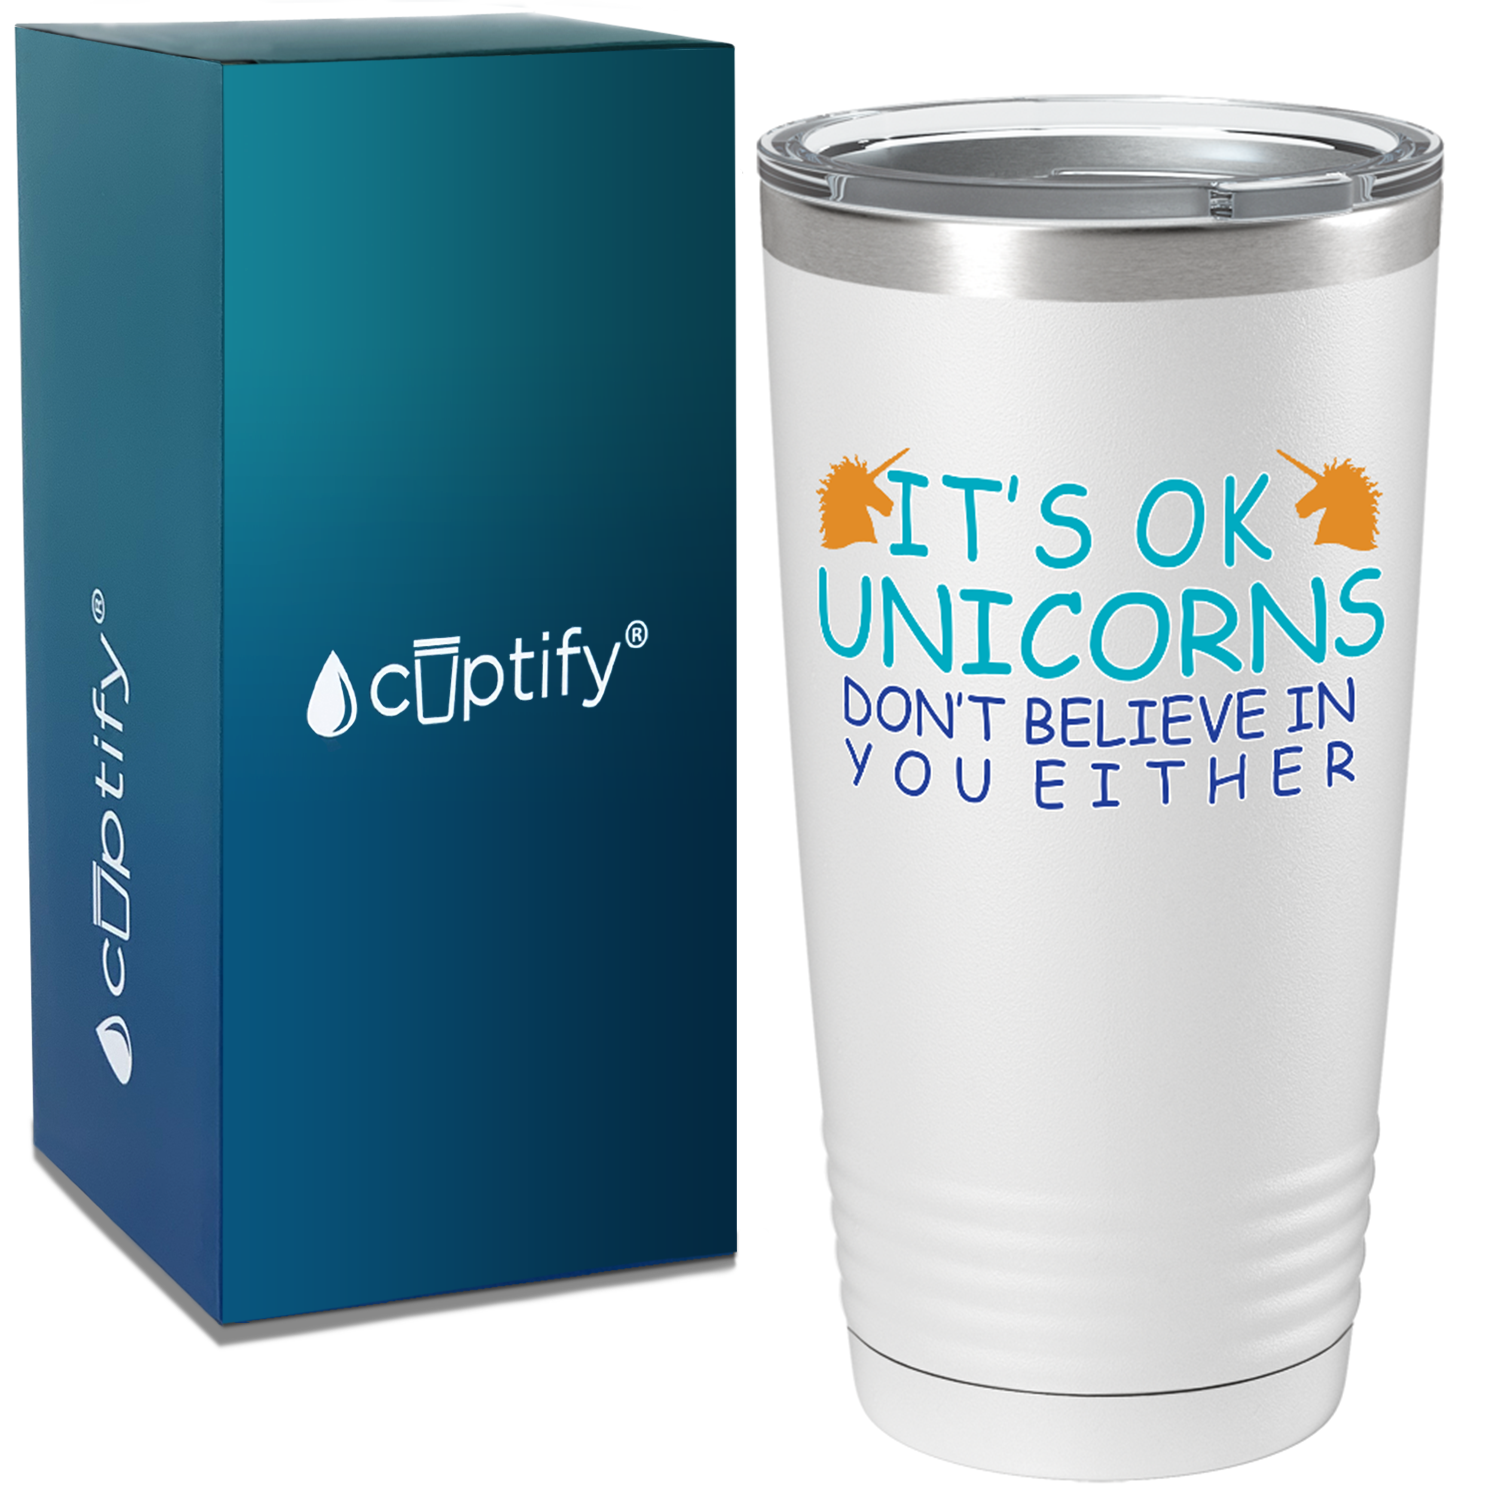 It's Ok Unicorns Don’t Believe in You Either on 20oz Tumbler